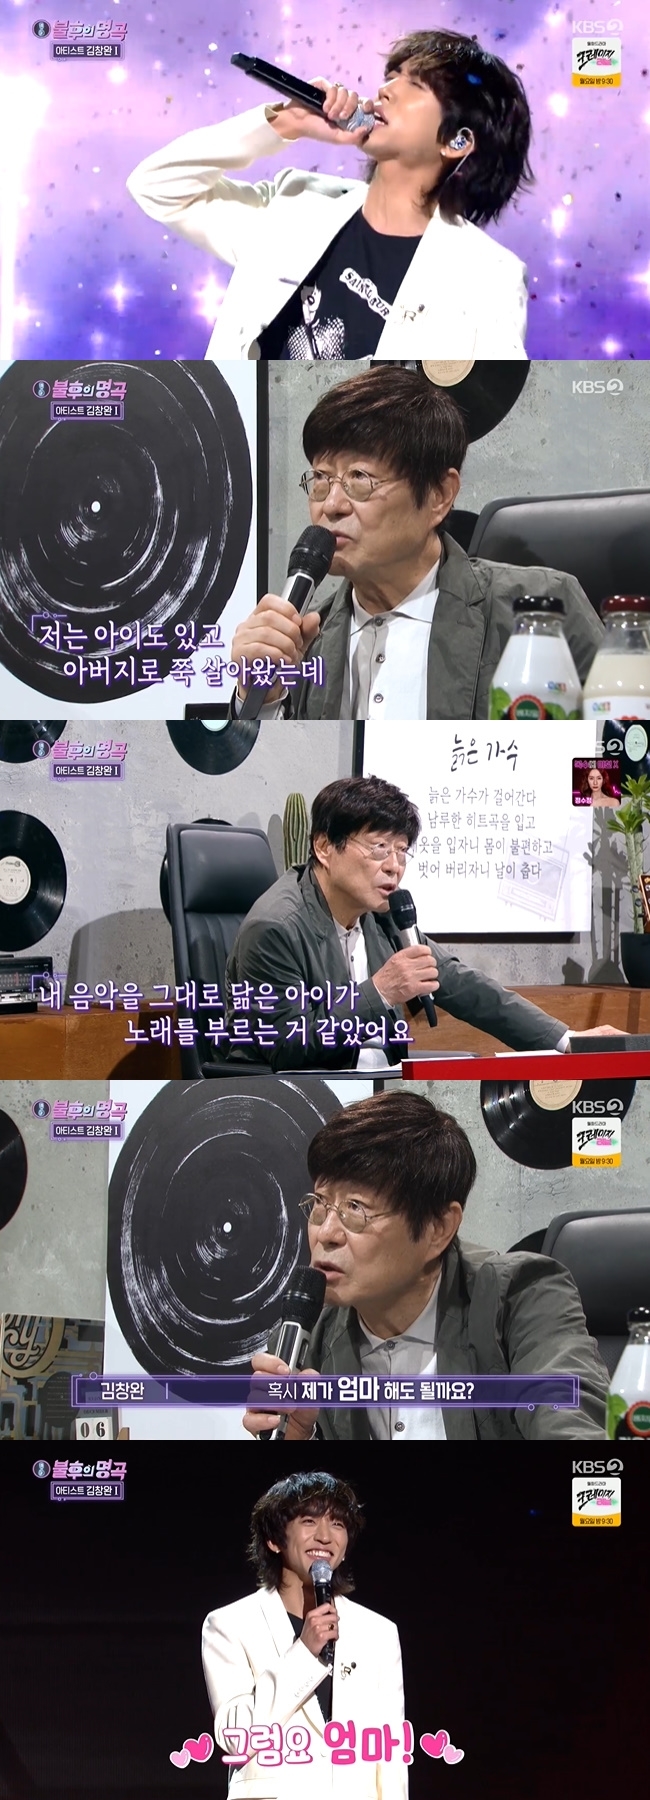 Kim Chang-wan praised Lee Seung-yoons stage as a mother.In KBS 2TV Immortal Songs: Singing the Legend, which was broadcast on March 19th, Lee Seung-yoons stage was released in the last order of Kim Chang-wan.Lee Seung-yoon expressed his respect, saying, Kim Chang-wans music will not be influenced by singer-songwriters who listen to guitar.Lee Seung-yoon said, I had time to go to Kim Chang-wans radio and constantly text me and drink together.I couldnt say I wasnt going out just after I had been drinking, he said, and he wont text me after he says yes.Youve been planning it carefully for a long time, he said, shaking his head.Lee Seung-yoon said, I am a person who came to leave a wonderful video, so I do not have a great desire to win.Lee Seung-yoon, who selected Your Meaning, which Iyu also remade, said, I was caught in a trap that I made myself that I would arrange an extraordinary arrangement if I did a cover song.This time, I said that I would sing lightly, but when I was singing, I liked the song, so the idea came out. I want to win and put this song on my album. Kim Chang-wan, who saw the stage, said, I had a very mysterious experience today. I have a child and I have been living as a father.Im going to be a mother, he said, and it was like a child singing my boat in Gala Rizzatto, when he was singing Your Meaning.Mom, she replied.